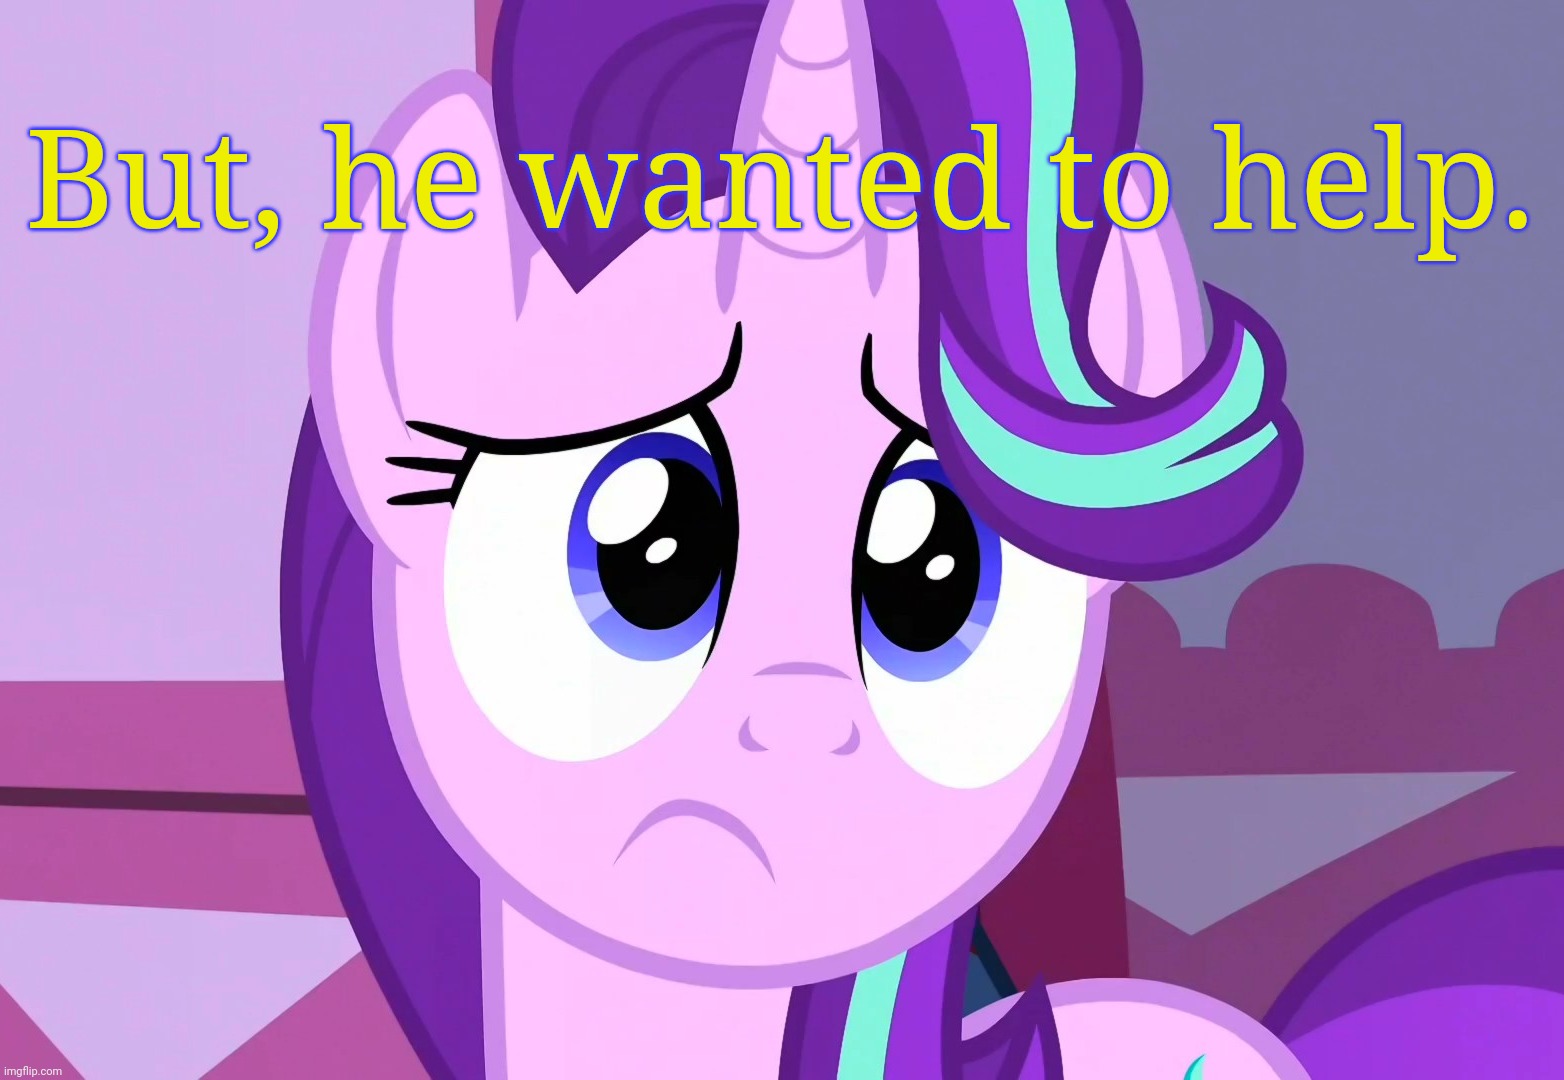 Sadlight Glimmer (MLP) | But, he wanted to help. | image tagged in sadlight glimmer mlp | made w/ Imgflip meme maker